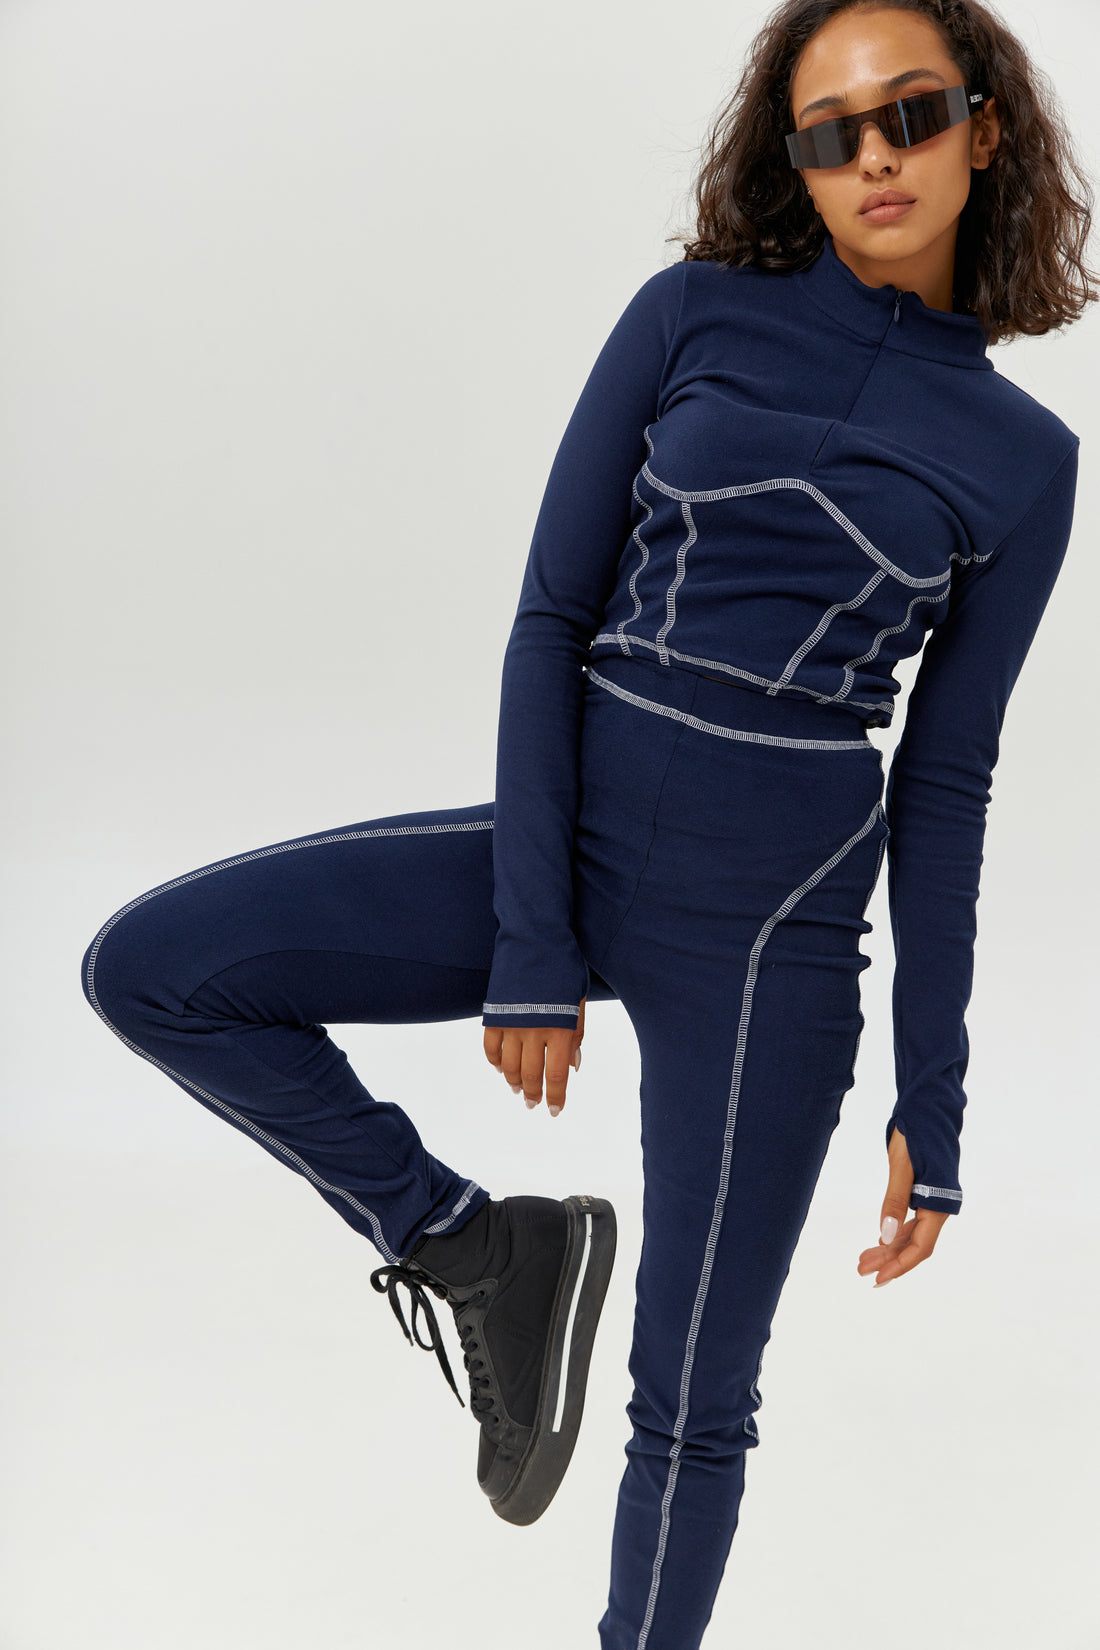 Base layers for skiing women's - Navy blue two piece set for winter - –  UpWearAndSuits